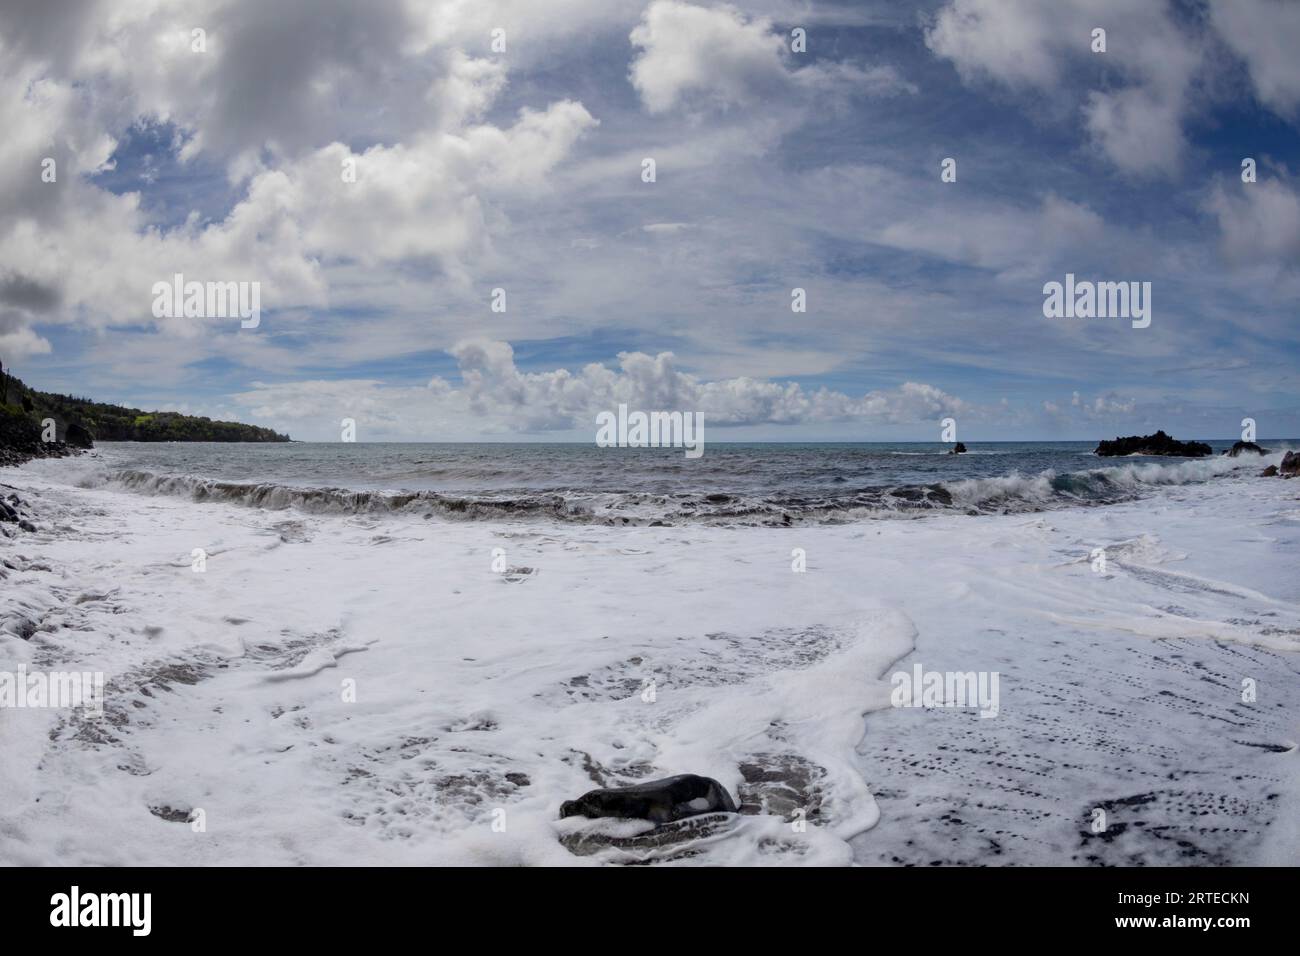 Scenic view of the Pacific Ocean with foamy surf covering the shore of the black lava sand beach under a blue, cloudy sky along the Road to Hana, s... Stock Photo